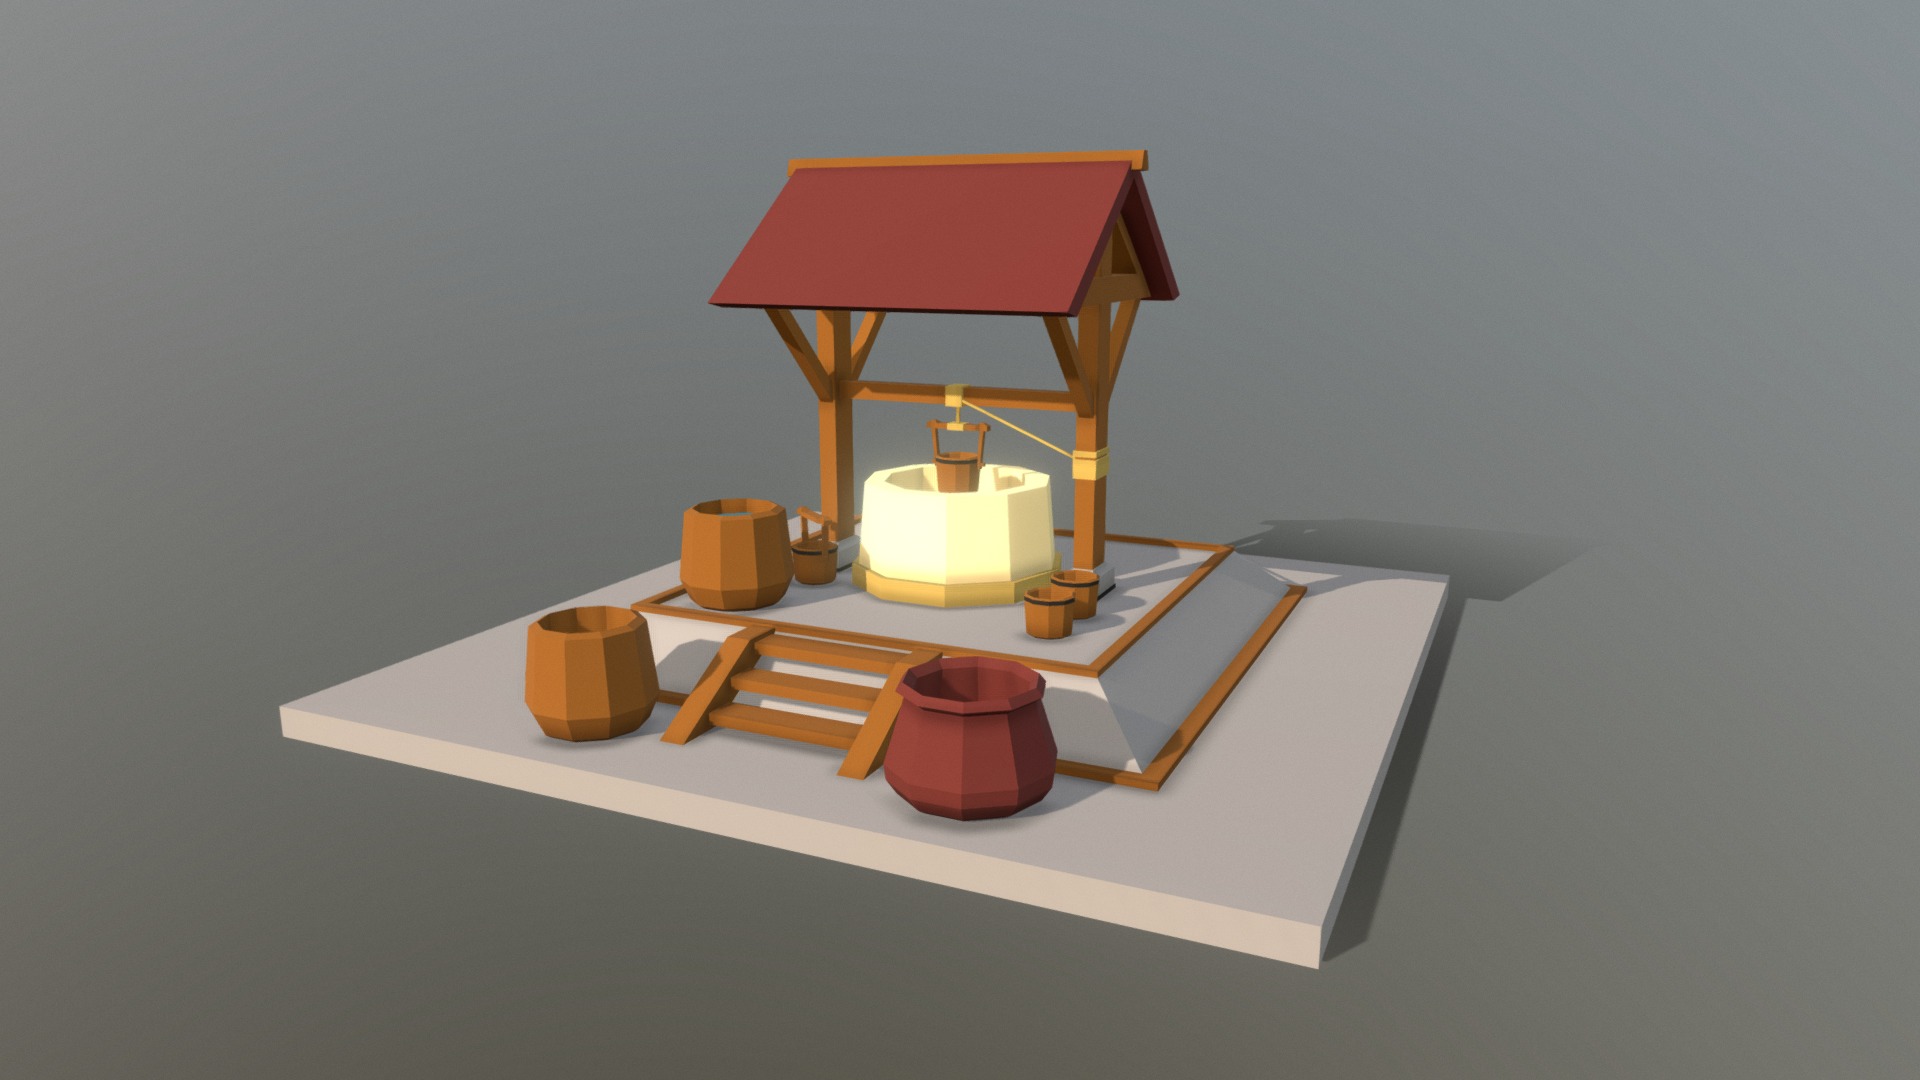 3D model HIE Well N1 - This is a 3D model of the HIE Well N1. The 3D model is about a table with a lamp and a table with objects on it.